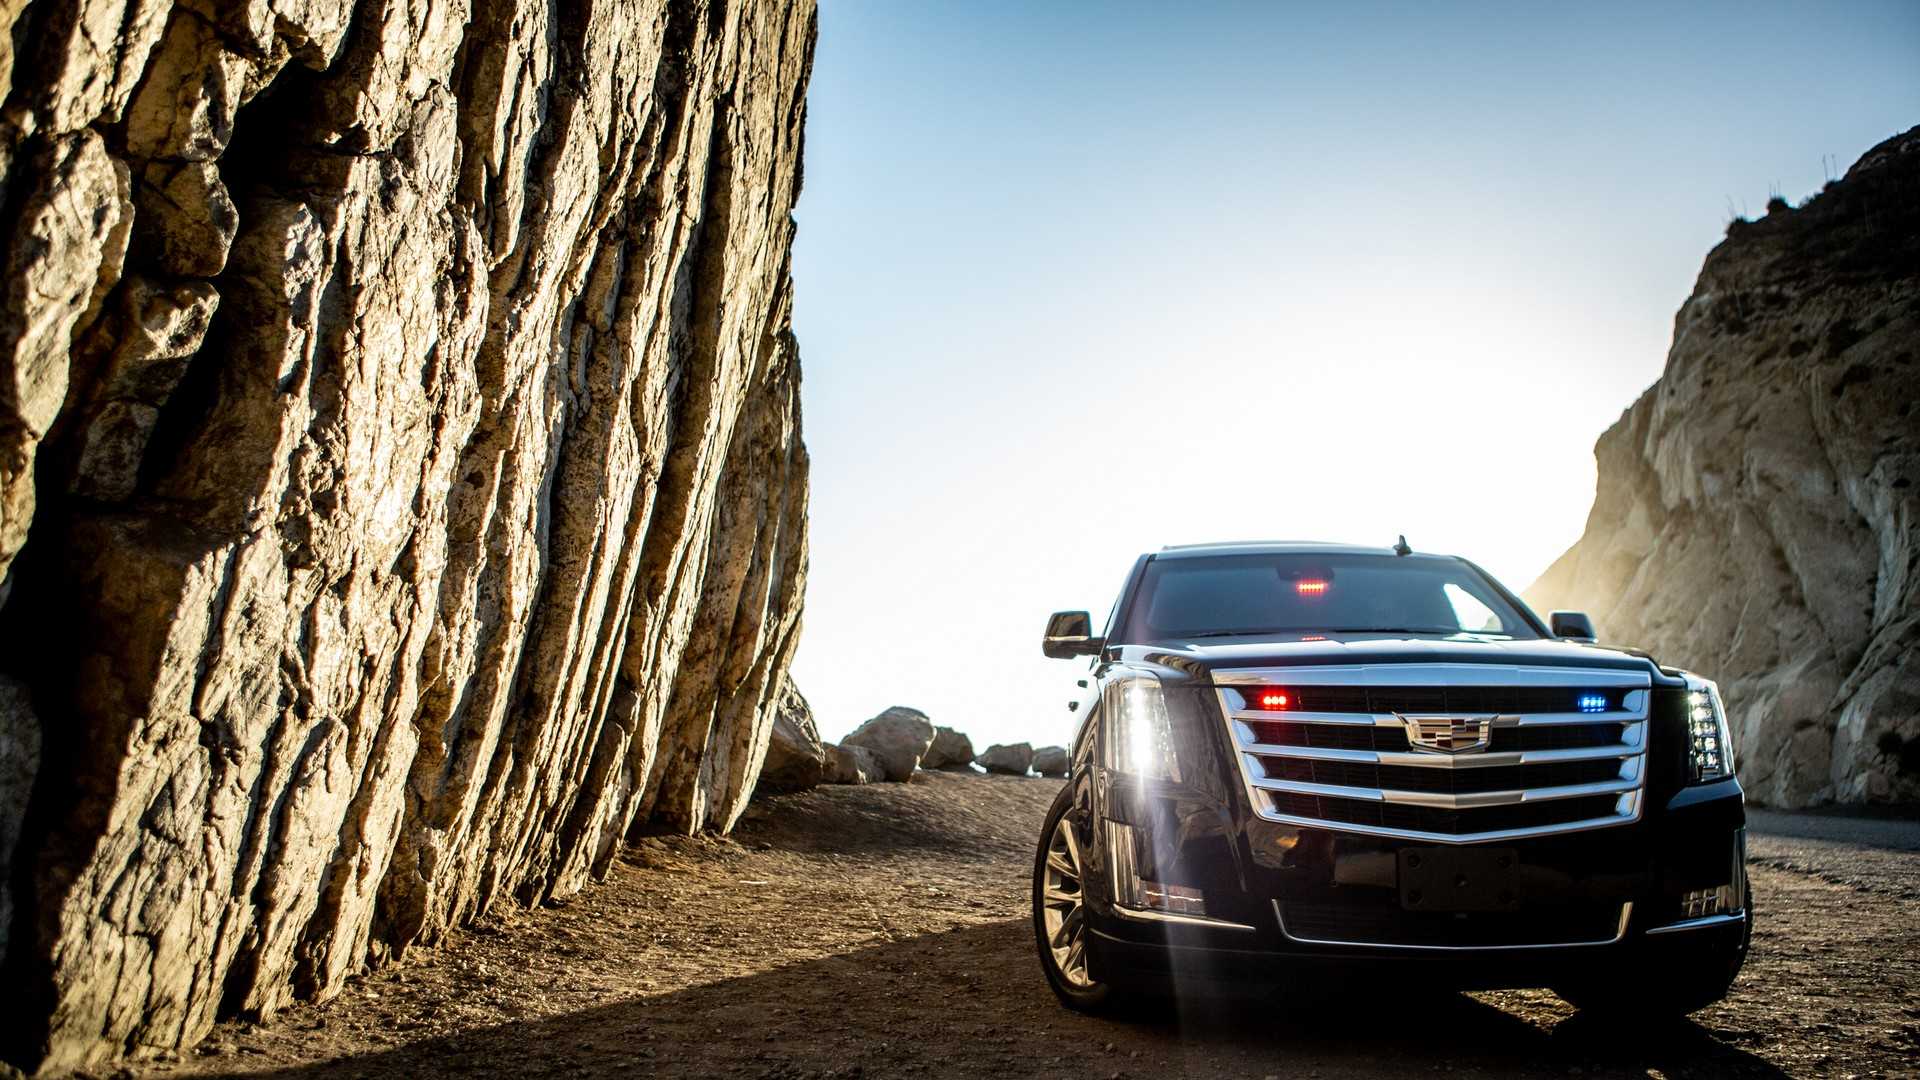 This US$350,000 Cadillac Escalade is an apocalyptic dream